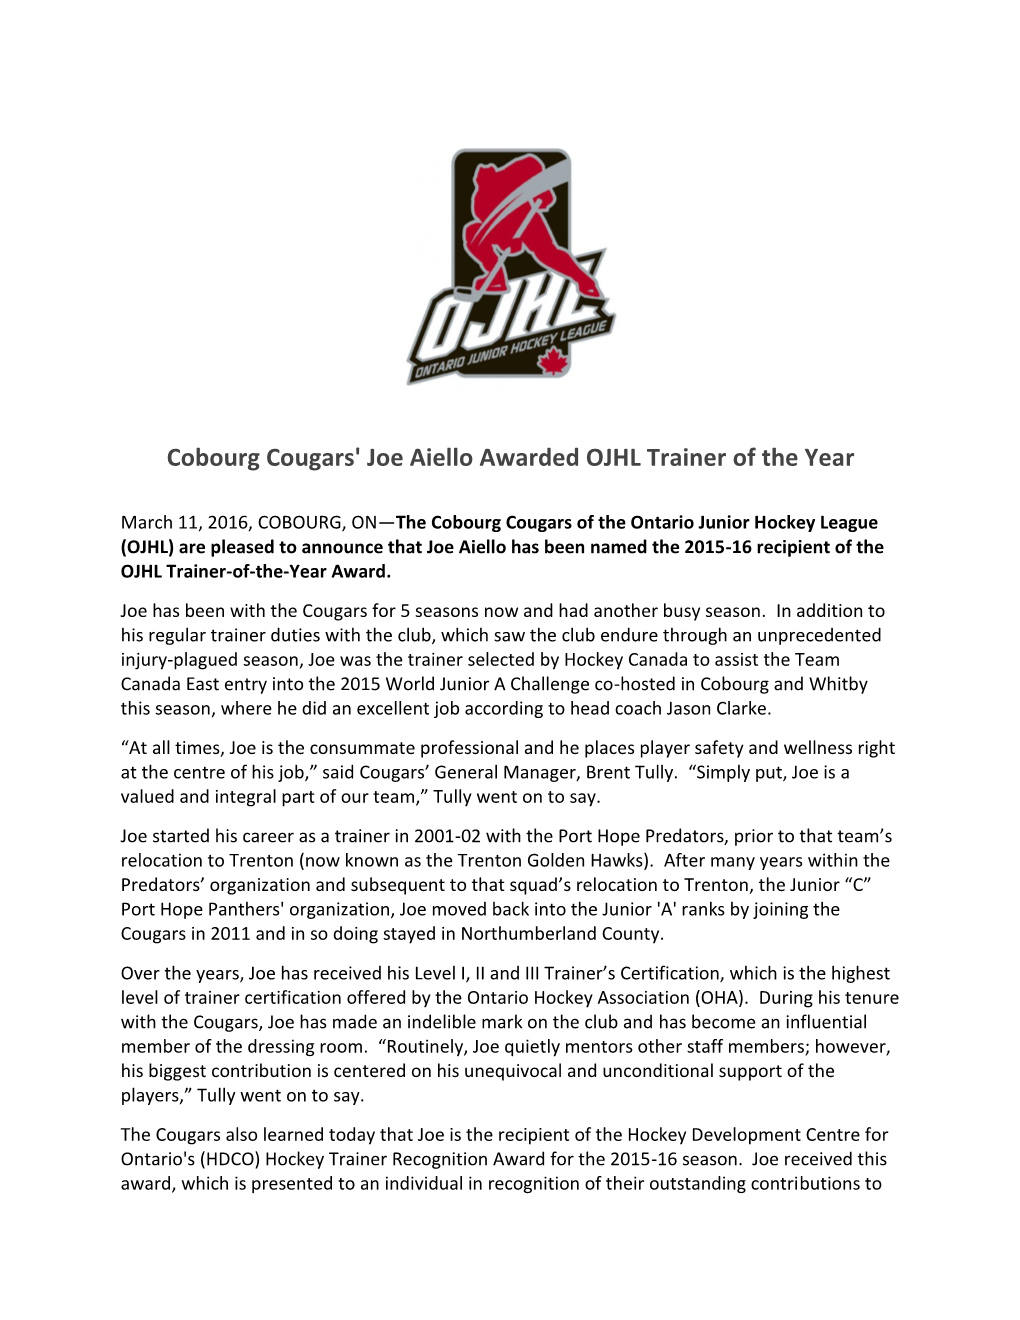 Cobourg Cougars' Joe Aiello Awarded OJHL Trainer of the Year